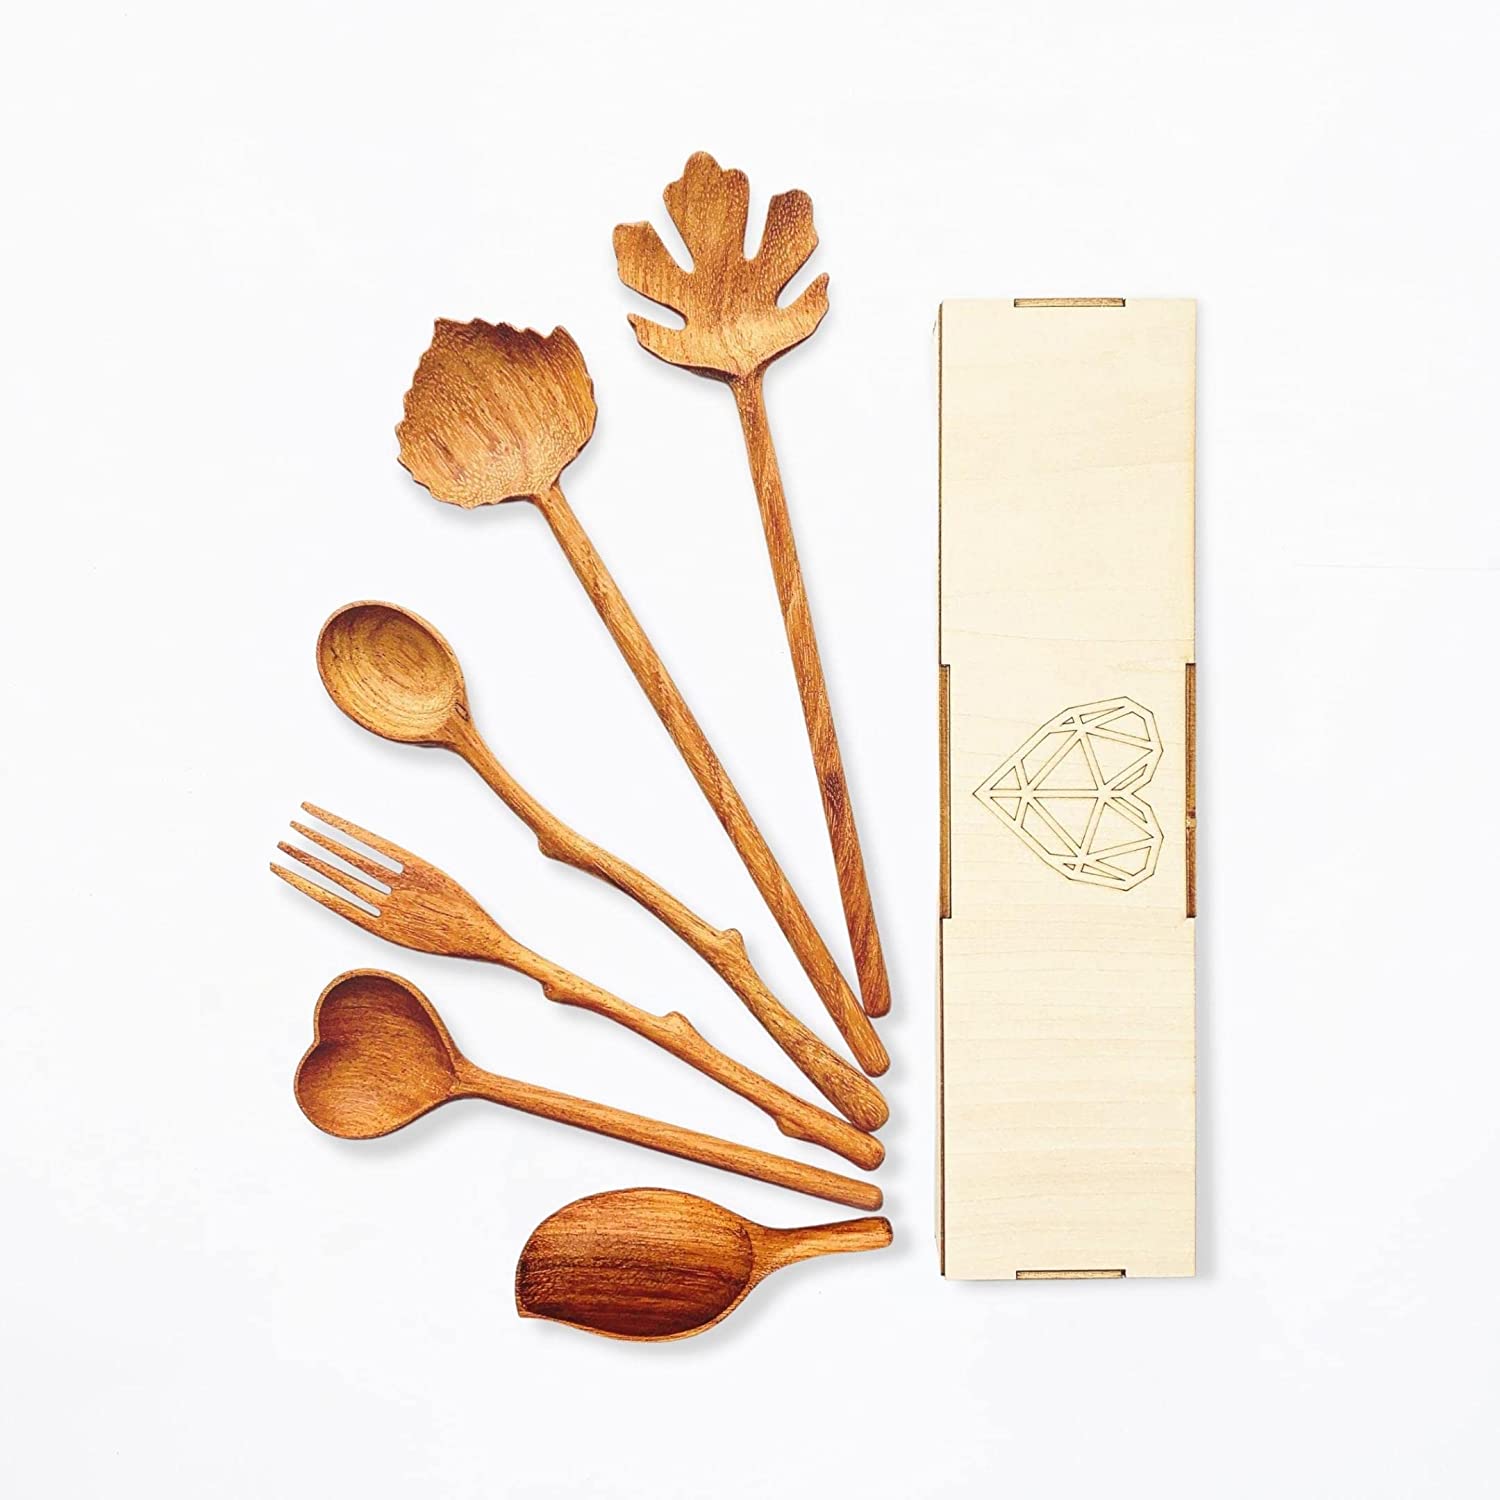 Wooden Spoons and Forks Set